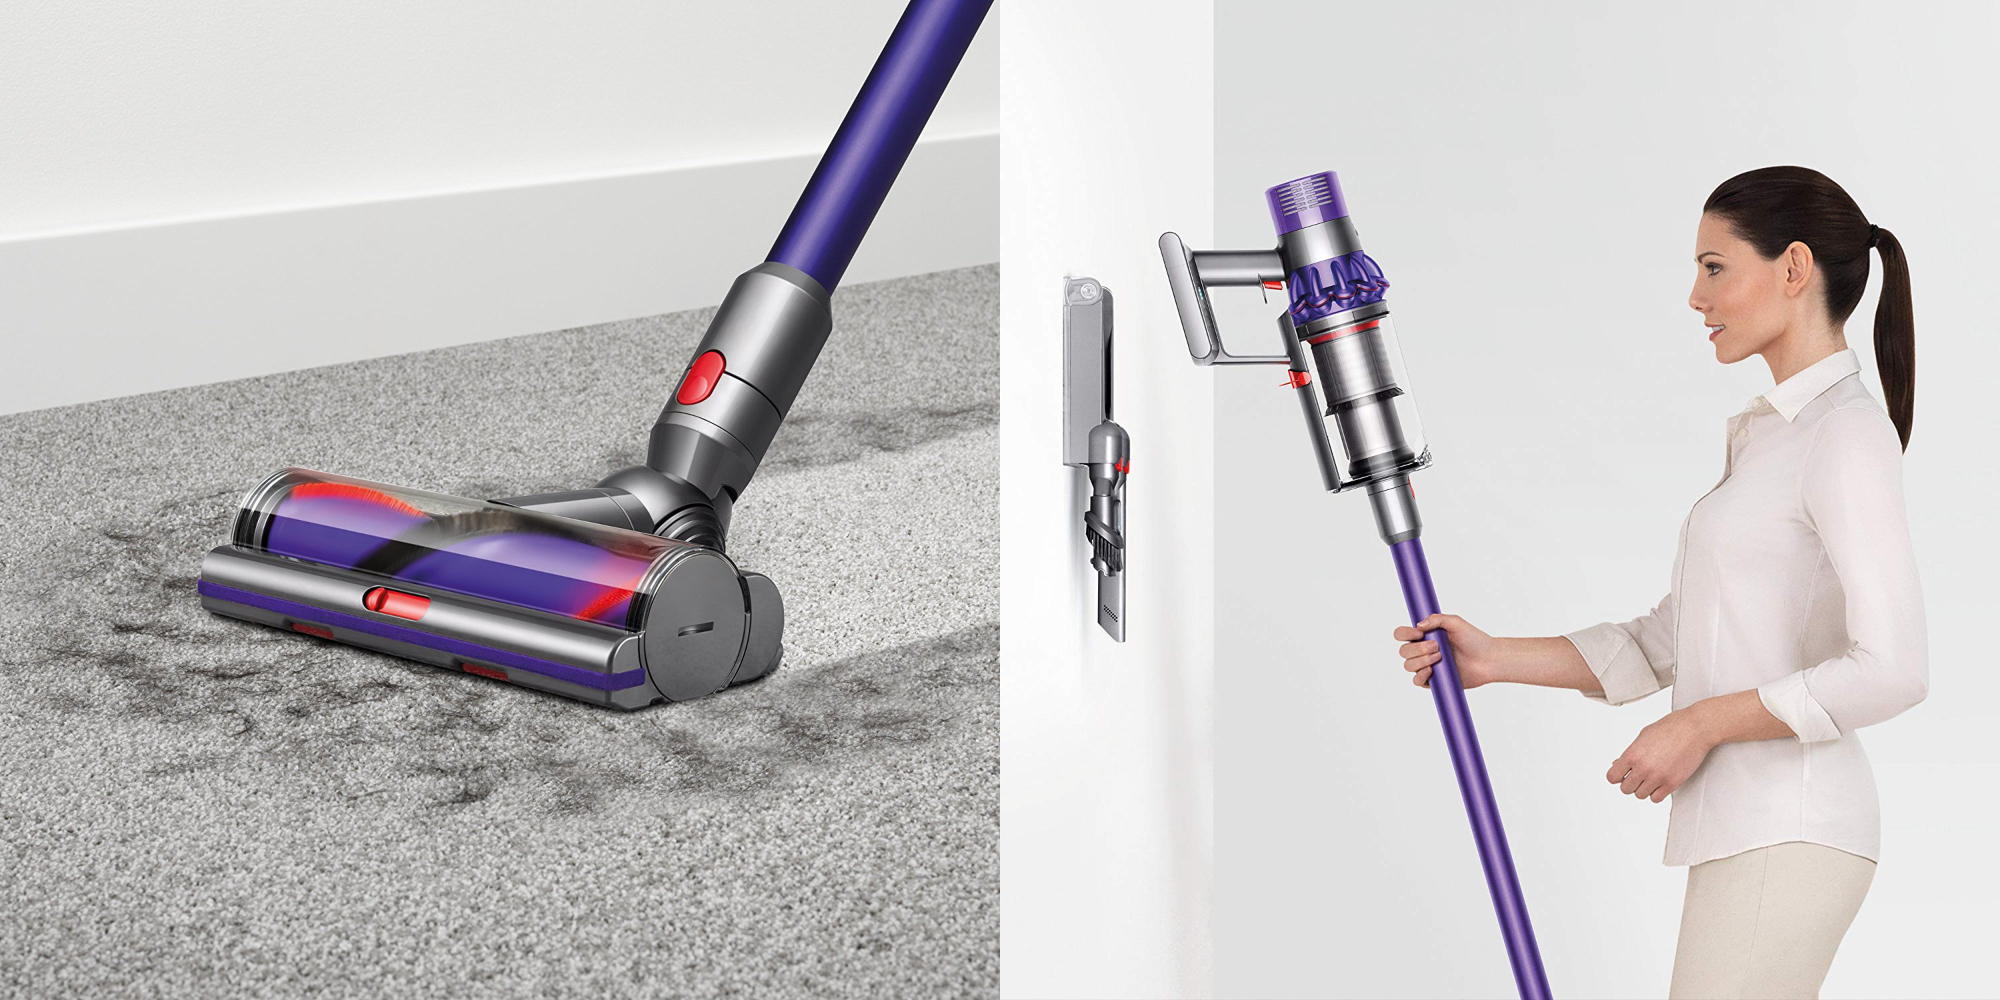 Free your home from pet hair with Dyson's V10 Animal Stick Vacuum for $380  (Reg. $500)